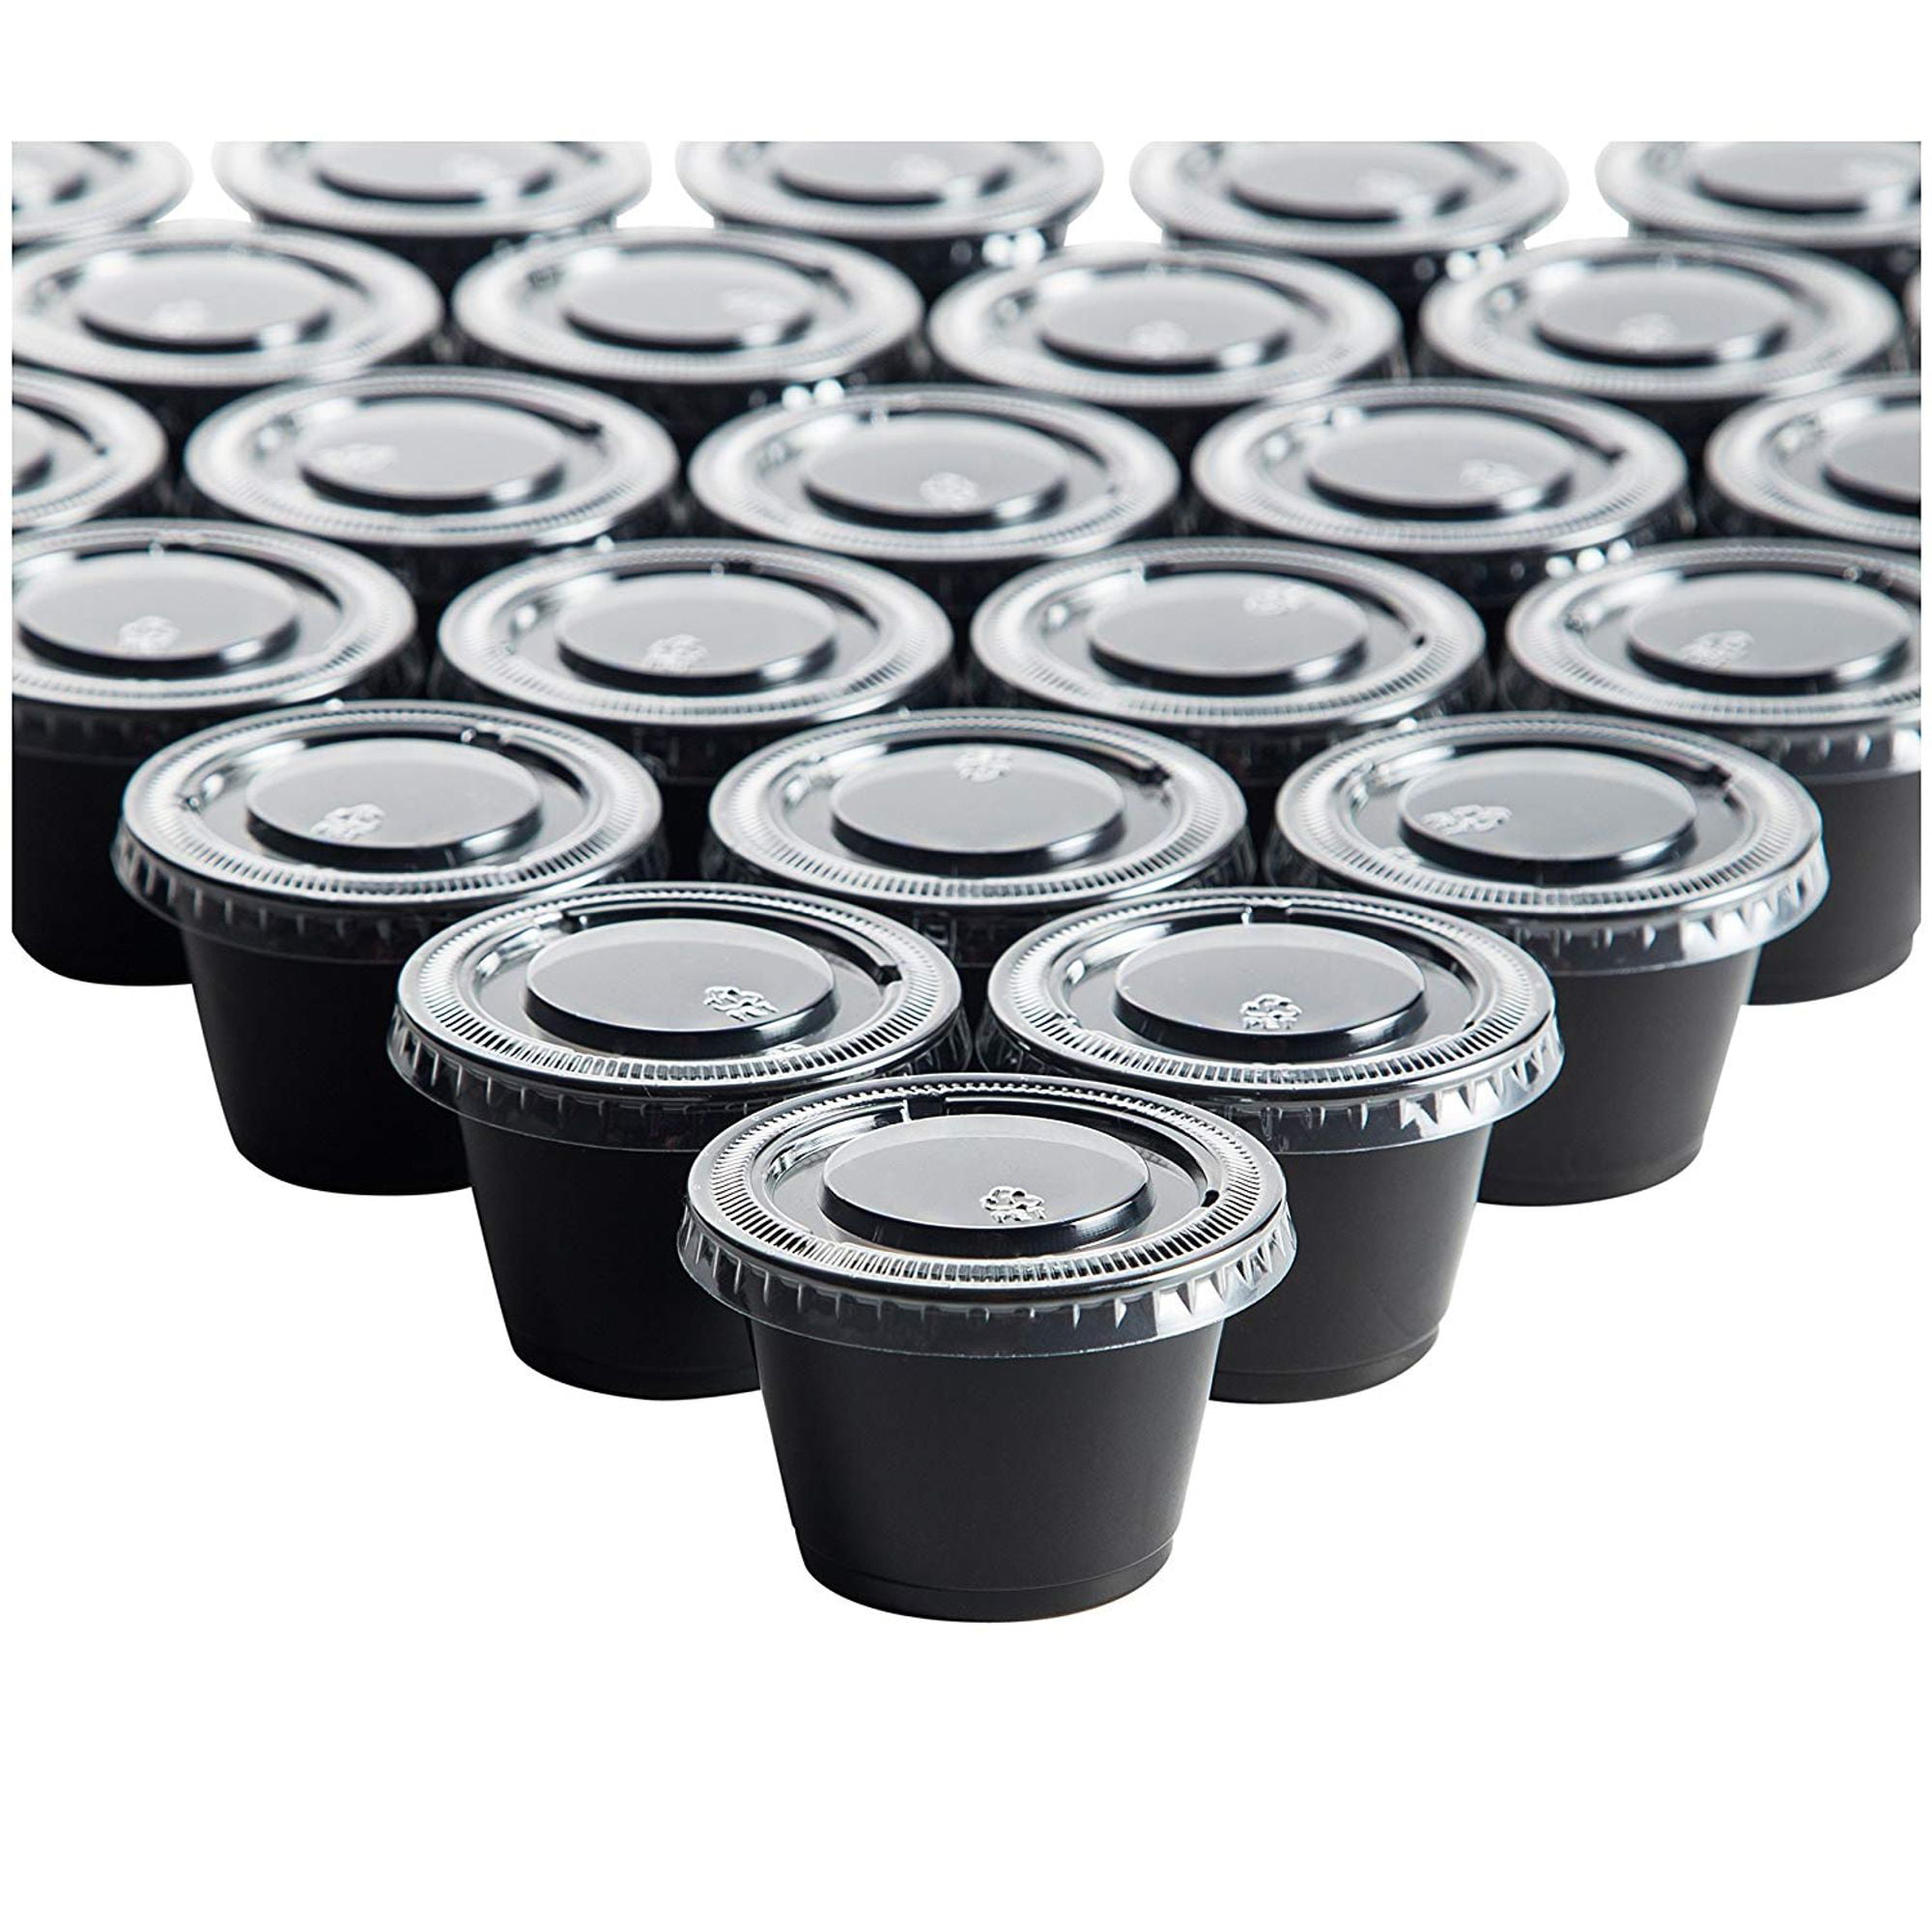 Plastic Portion Cups with Lids - 250-Piece Disposable to-go Sauce